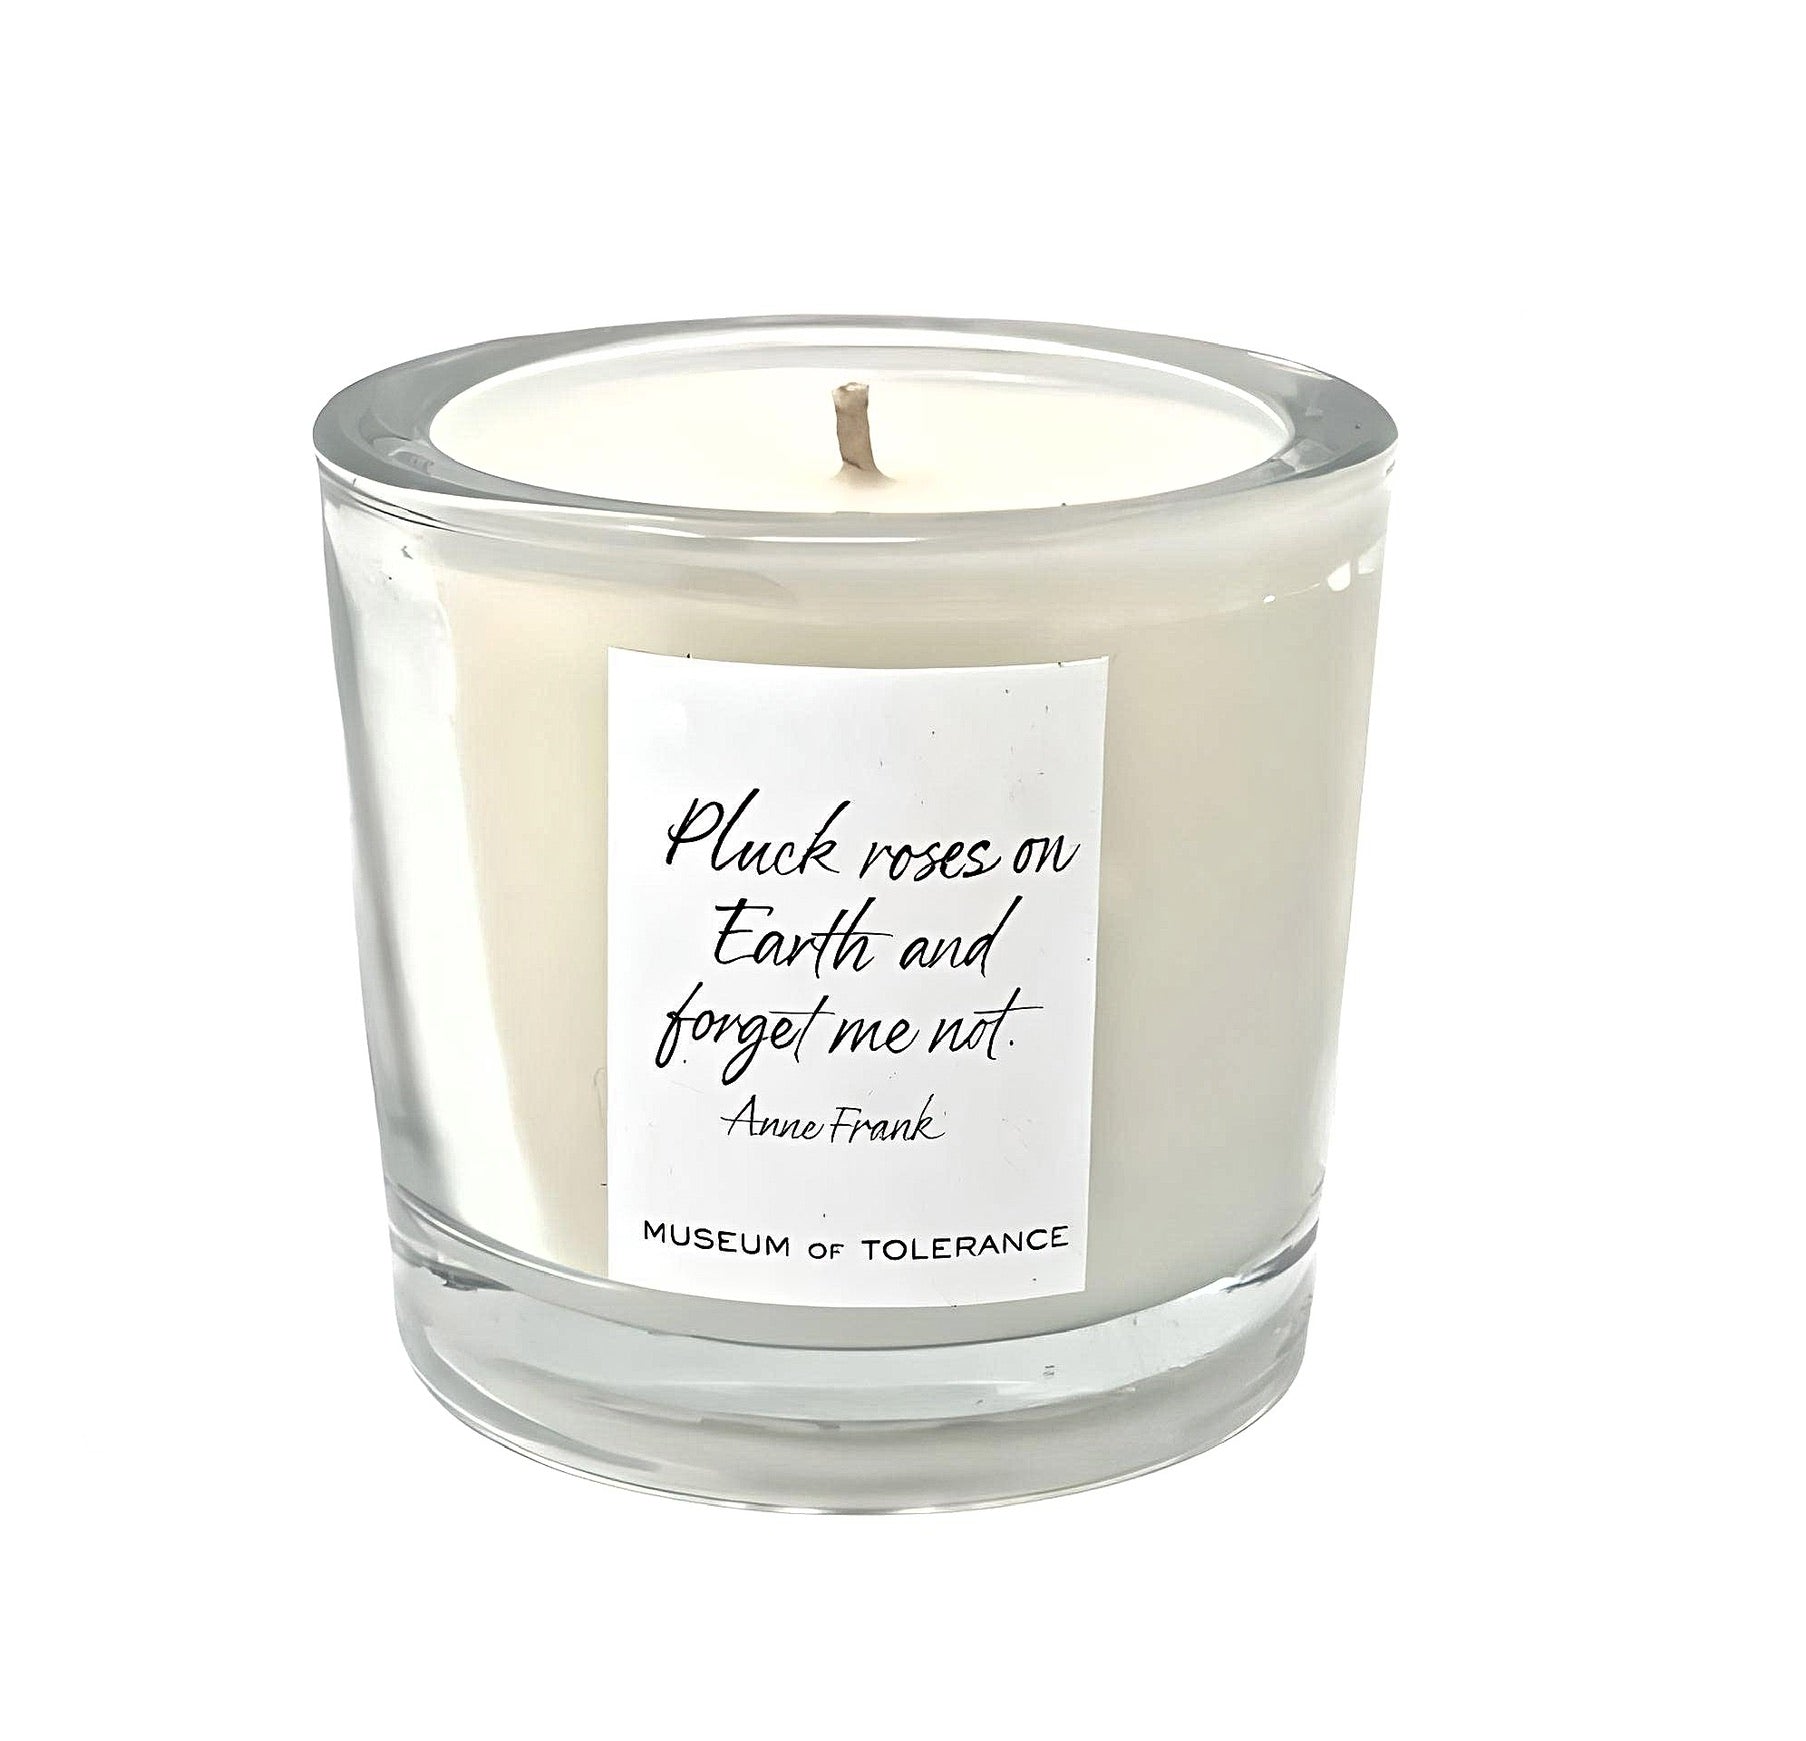 Anne Frank "Pluck Roses" Candle (Small)